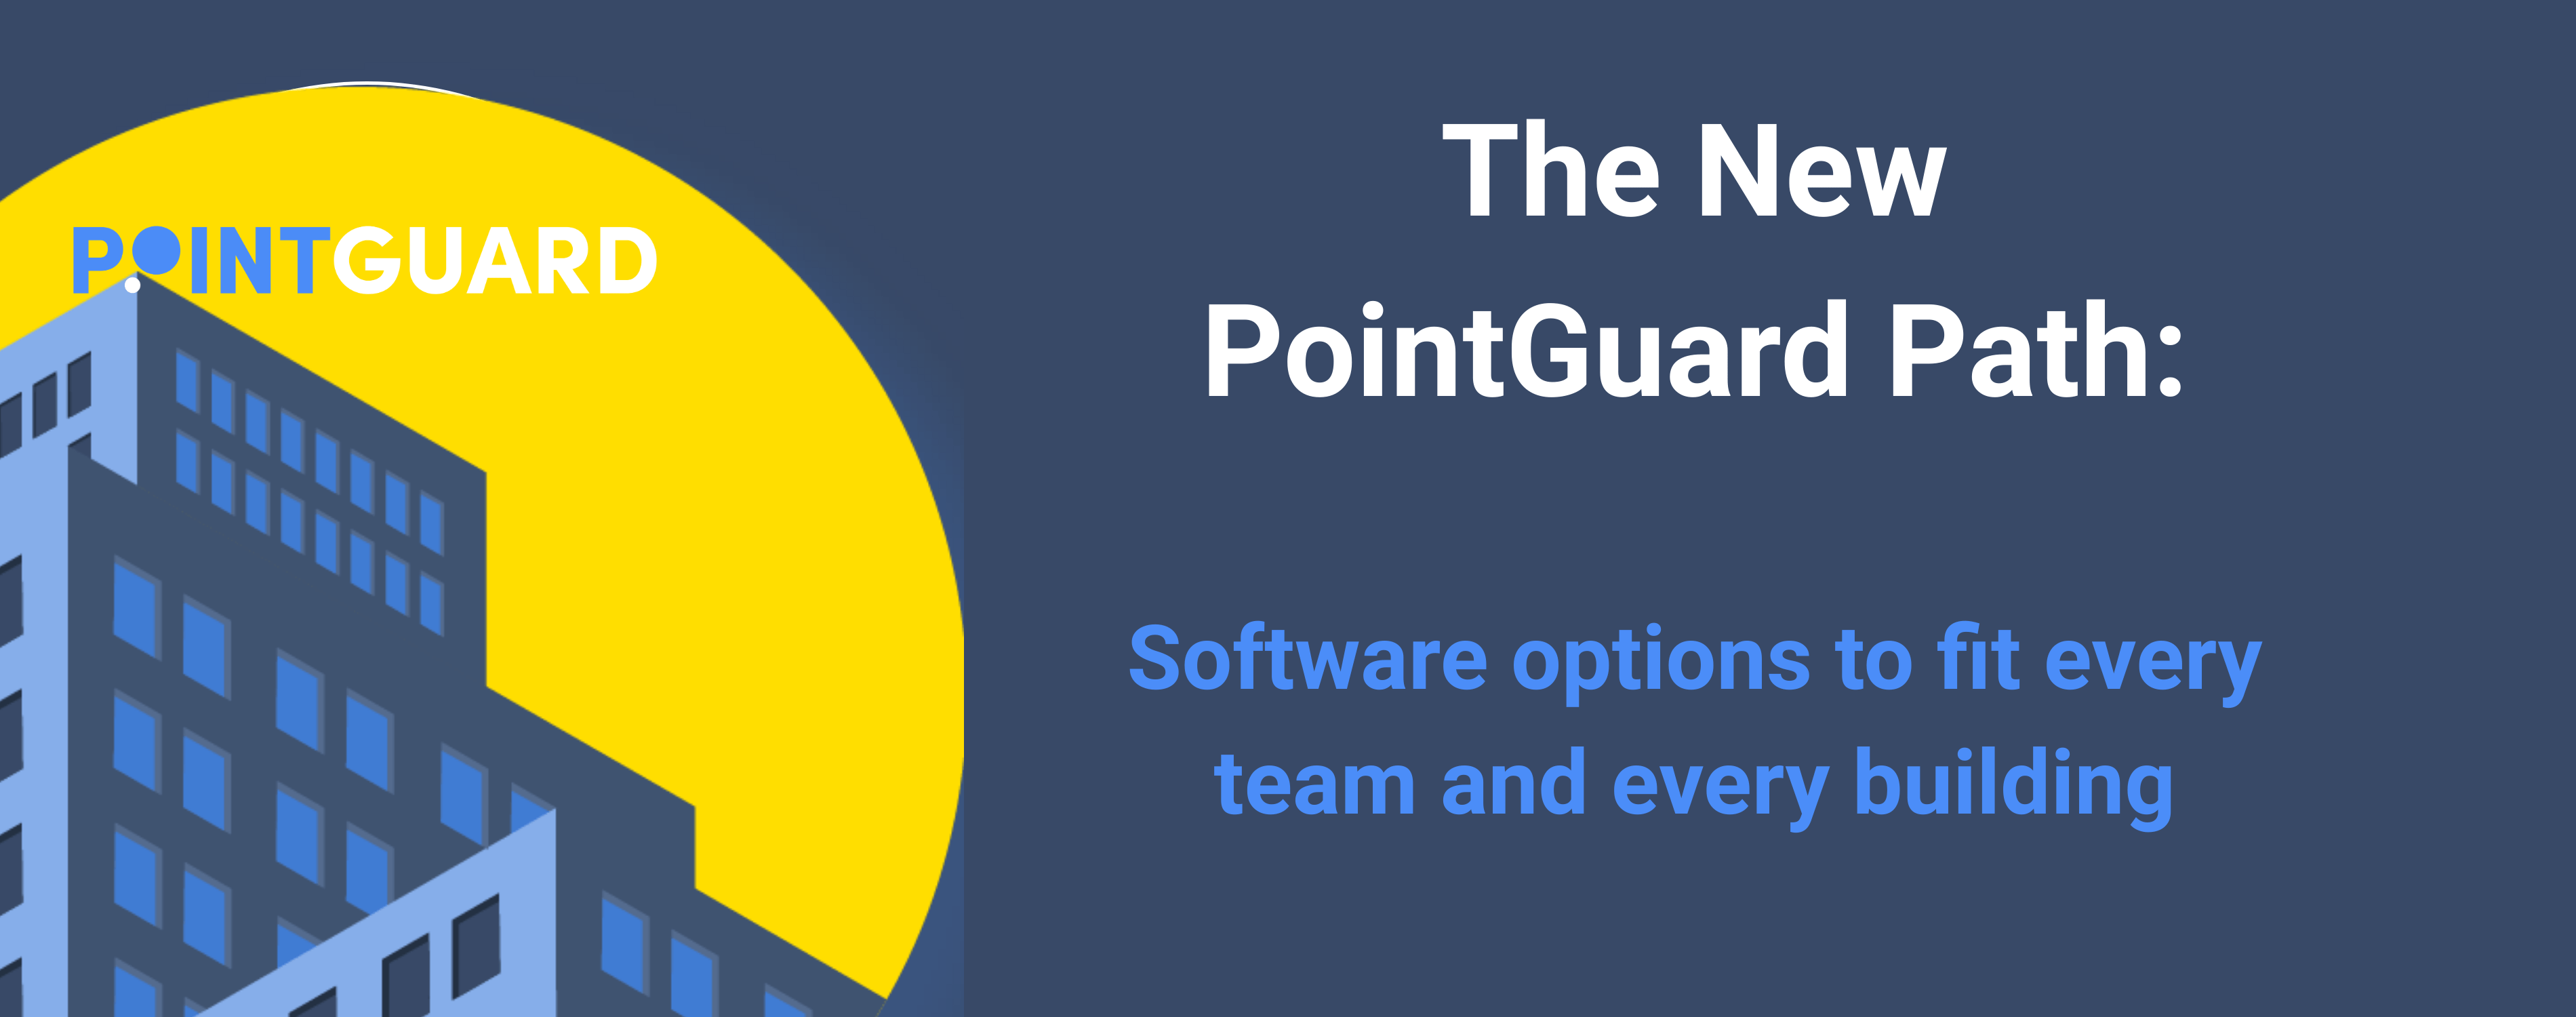 PointGuard Announces New Services with Choose-Your-Goals Levels